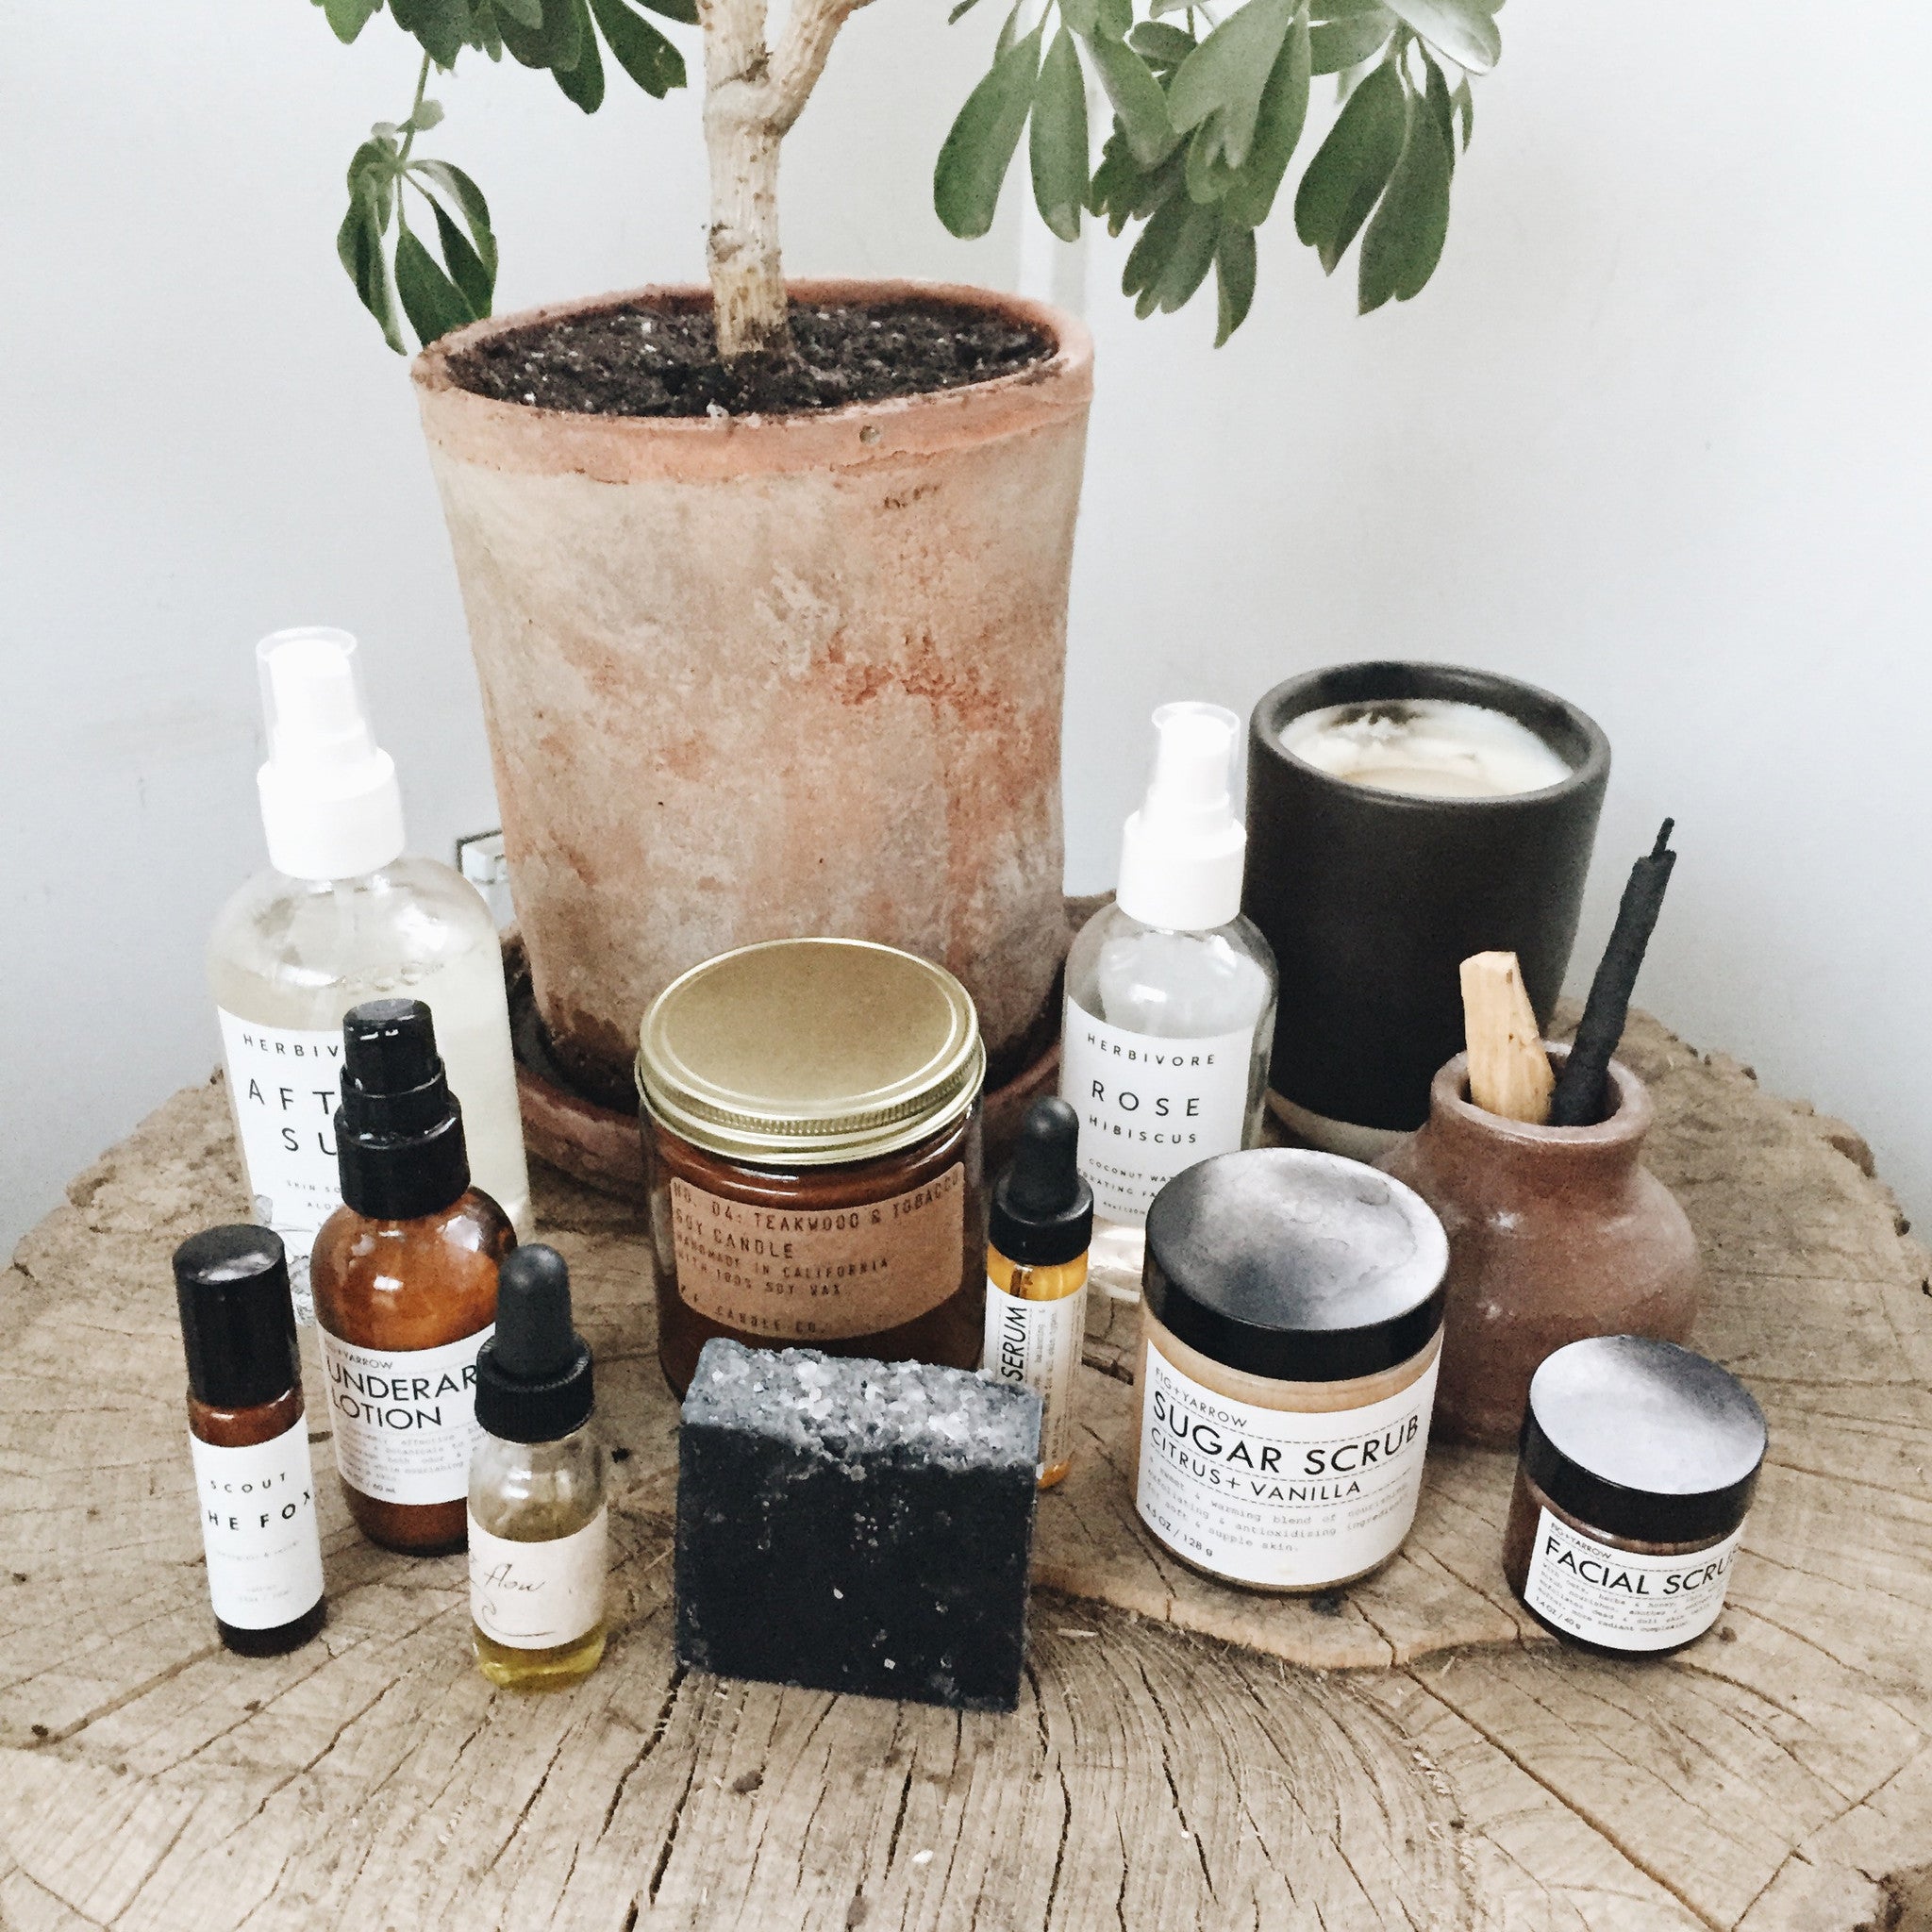 Revival Home : Apothecary Favorites